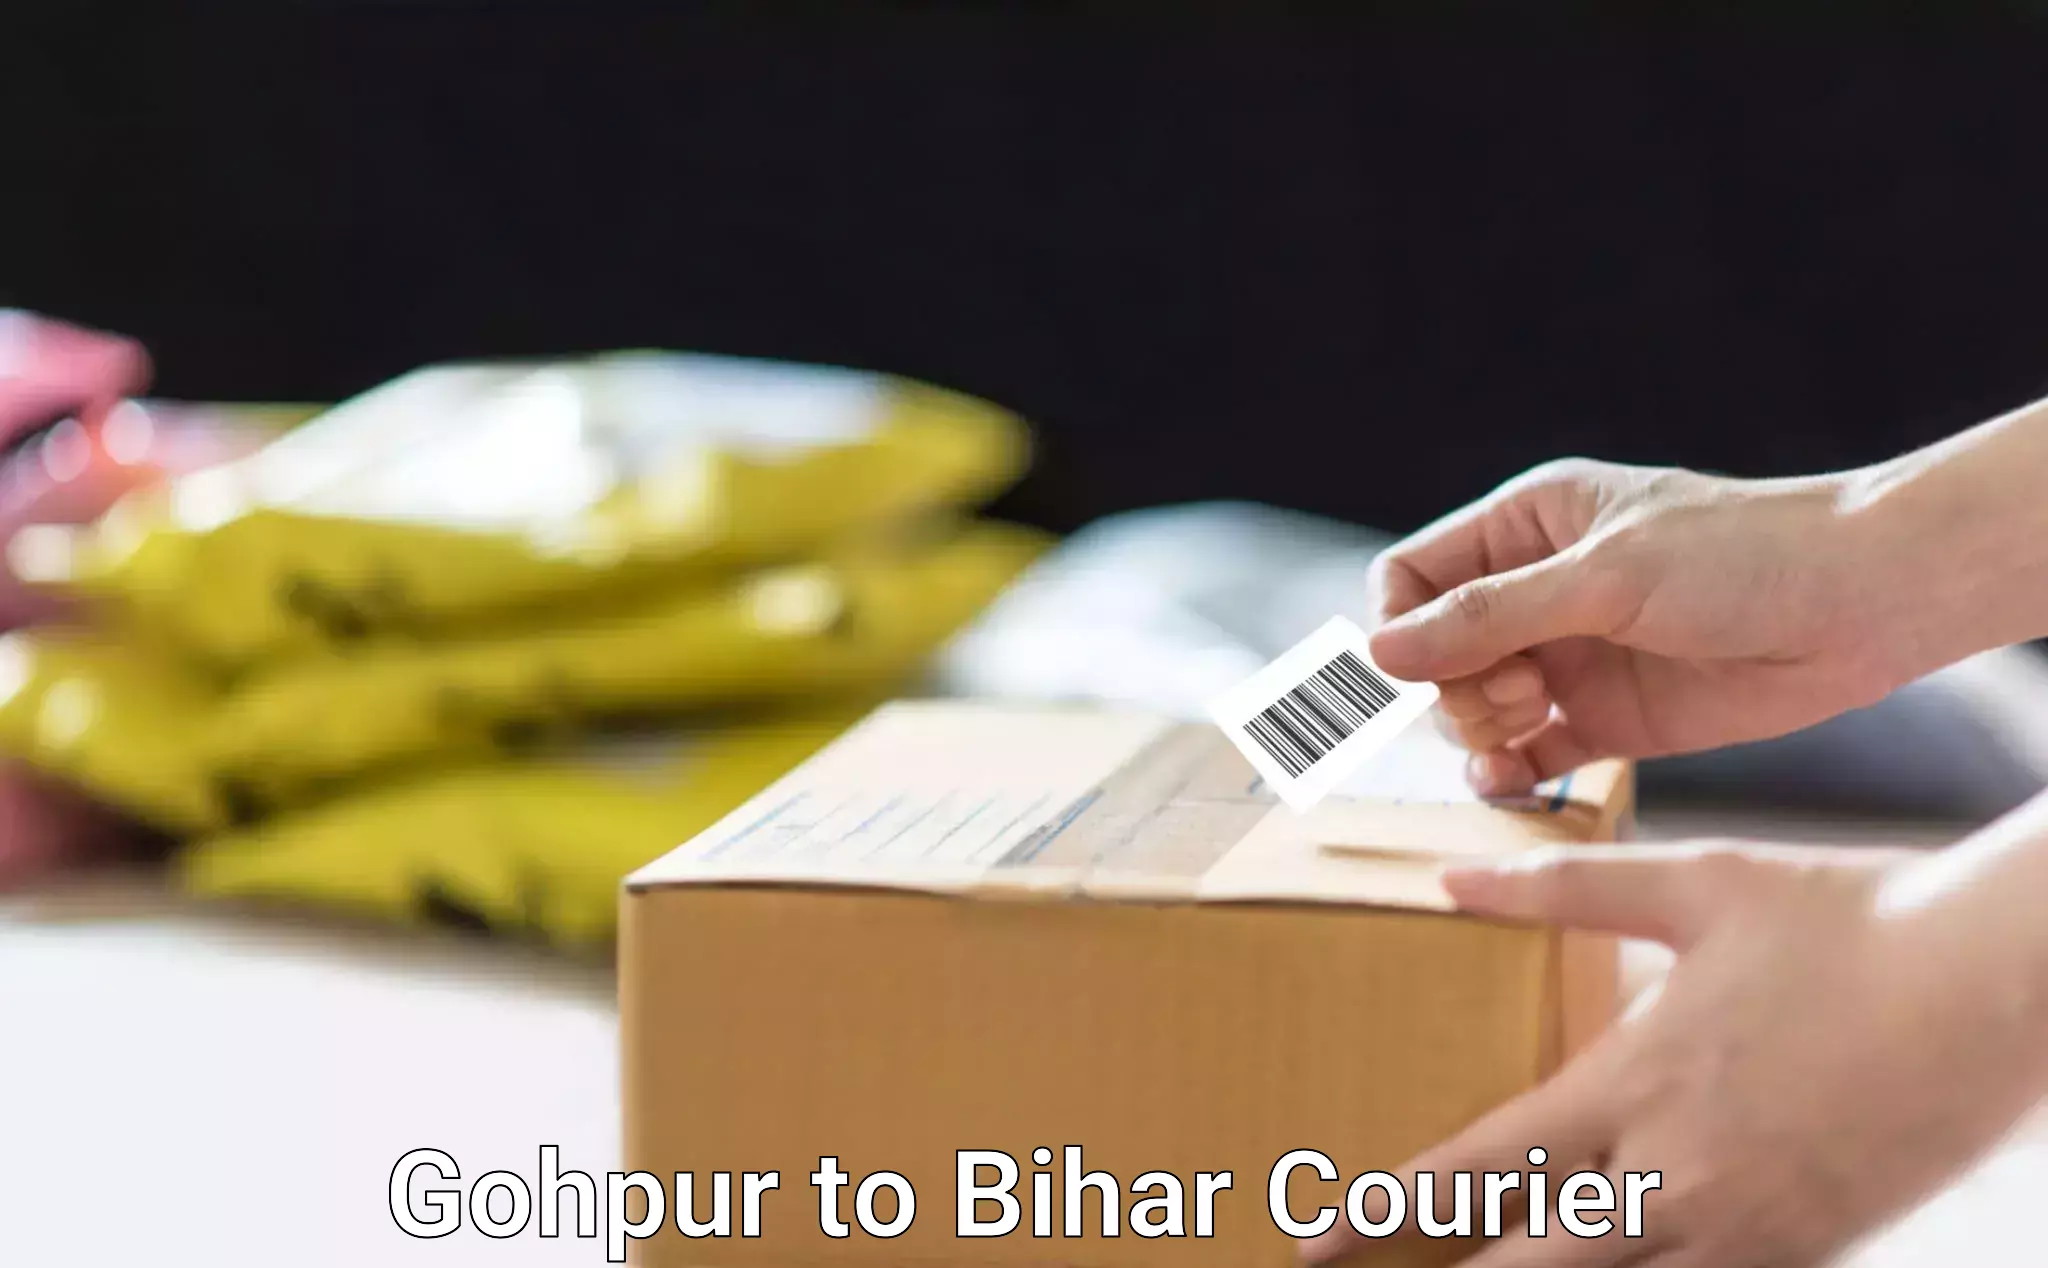 Expedited shipping methods in Gohpur to Jehanabad